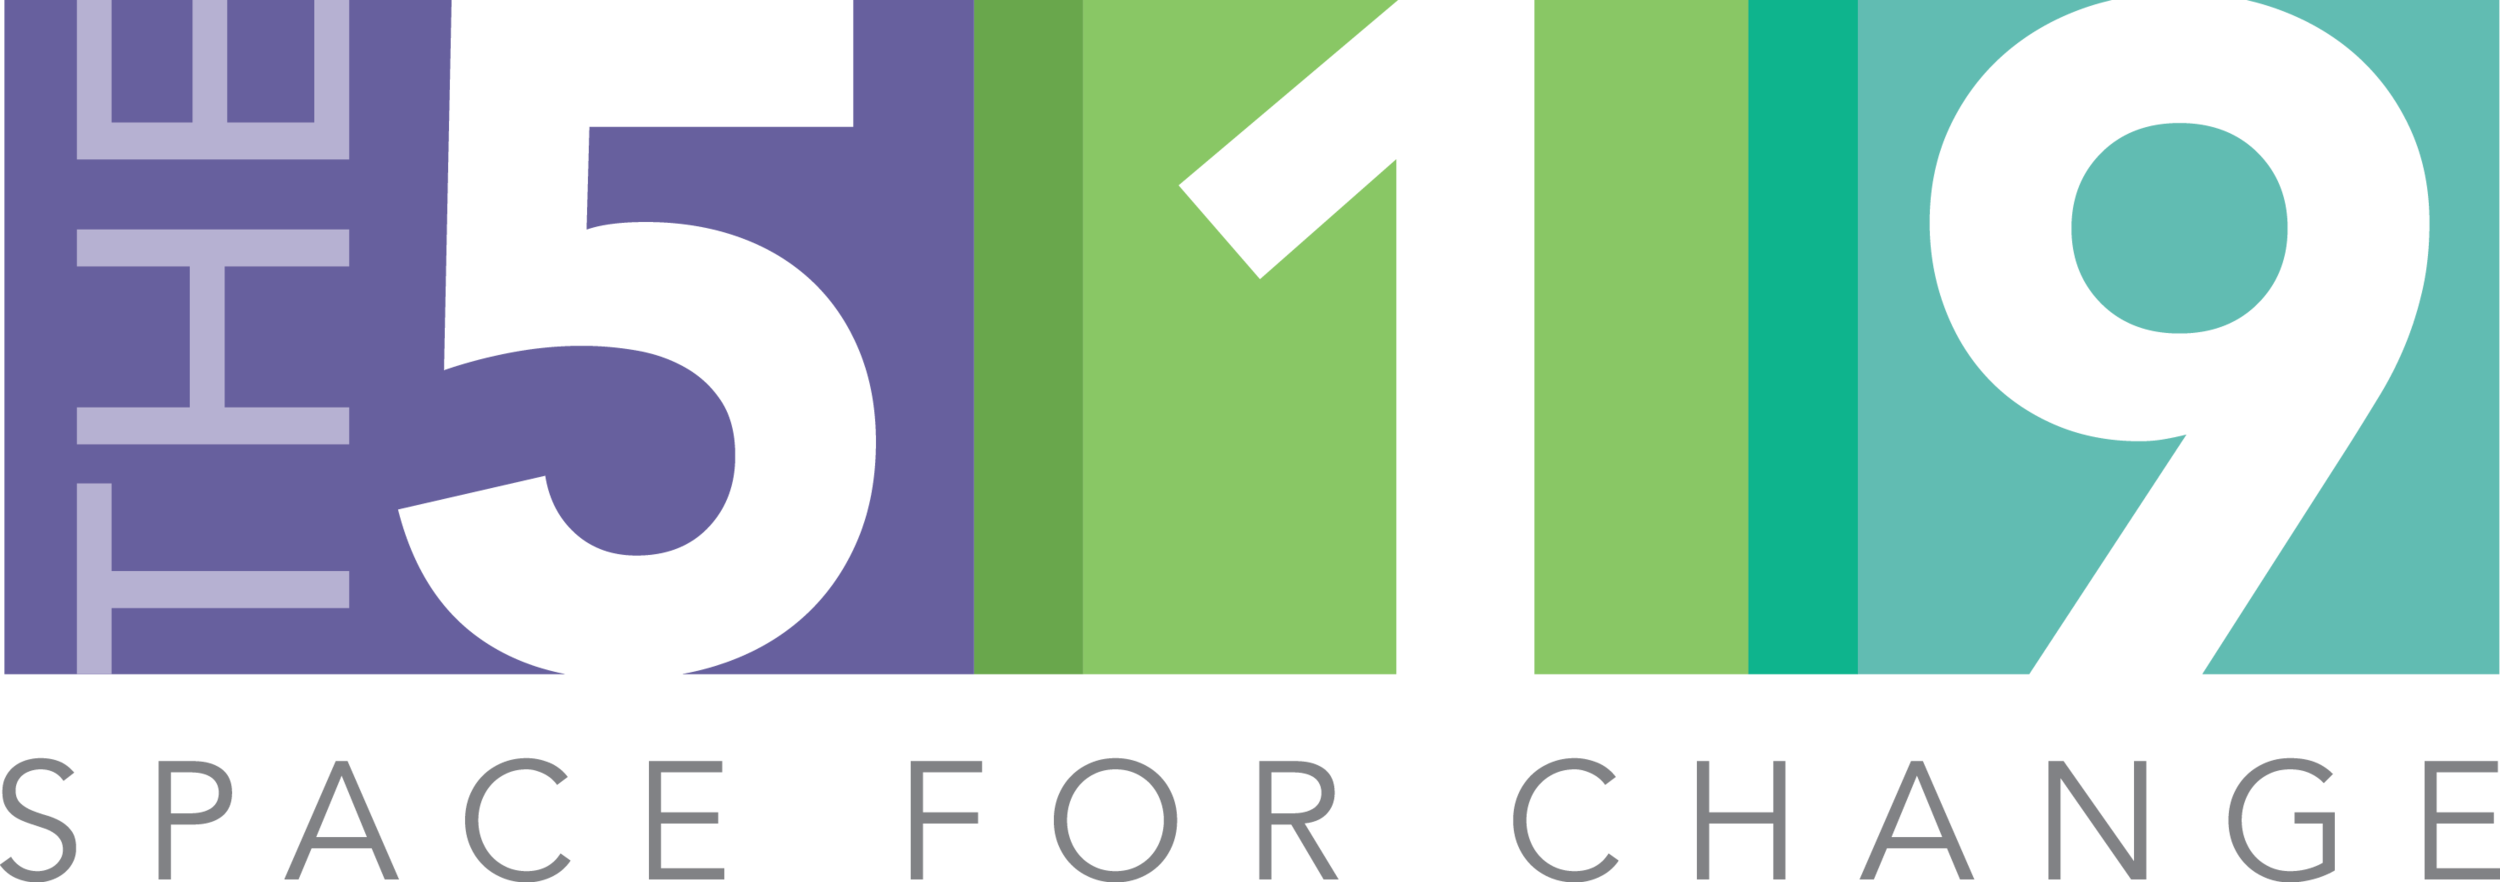 The 519 Logo.png